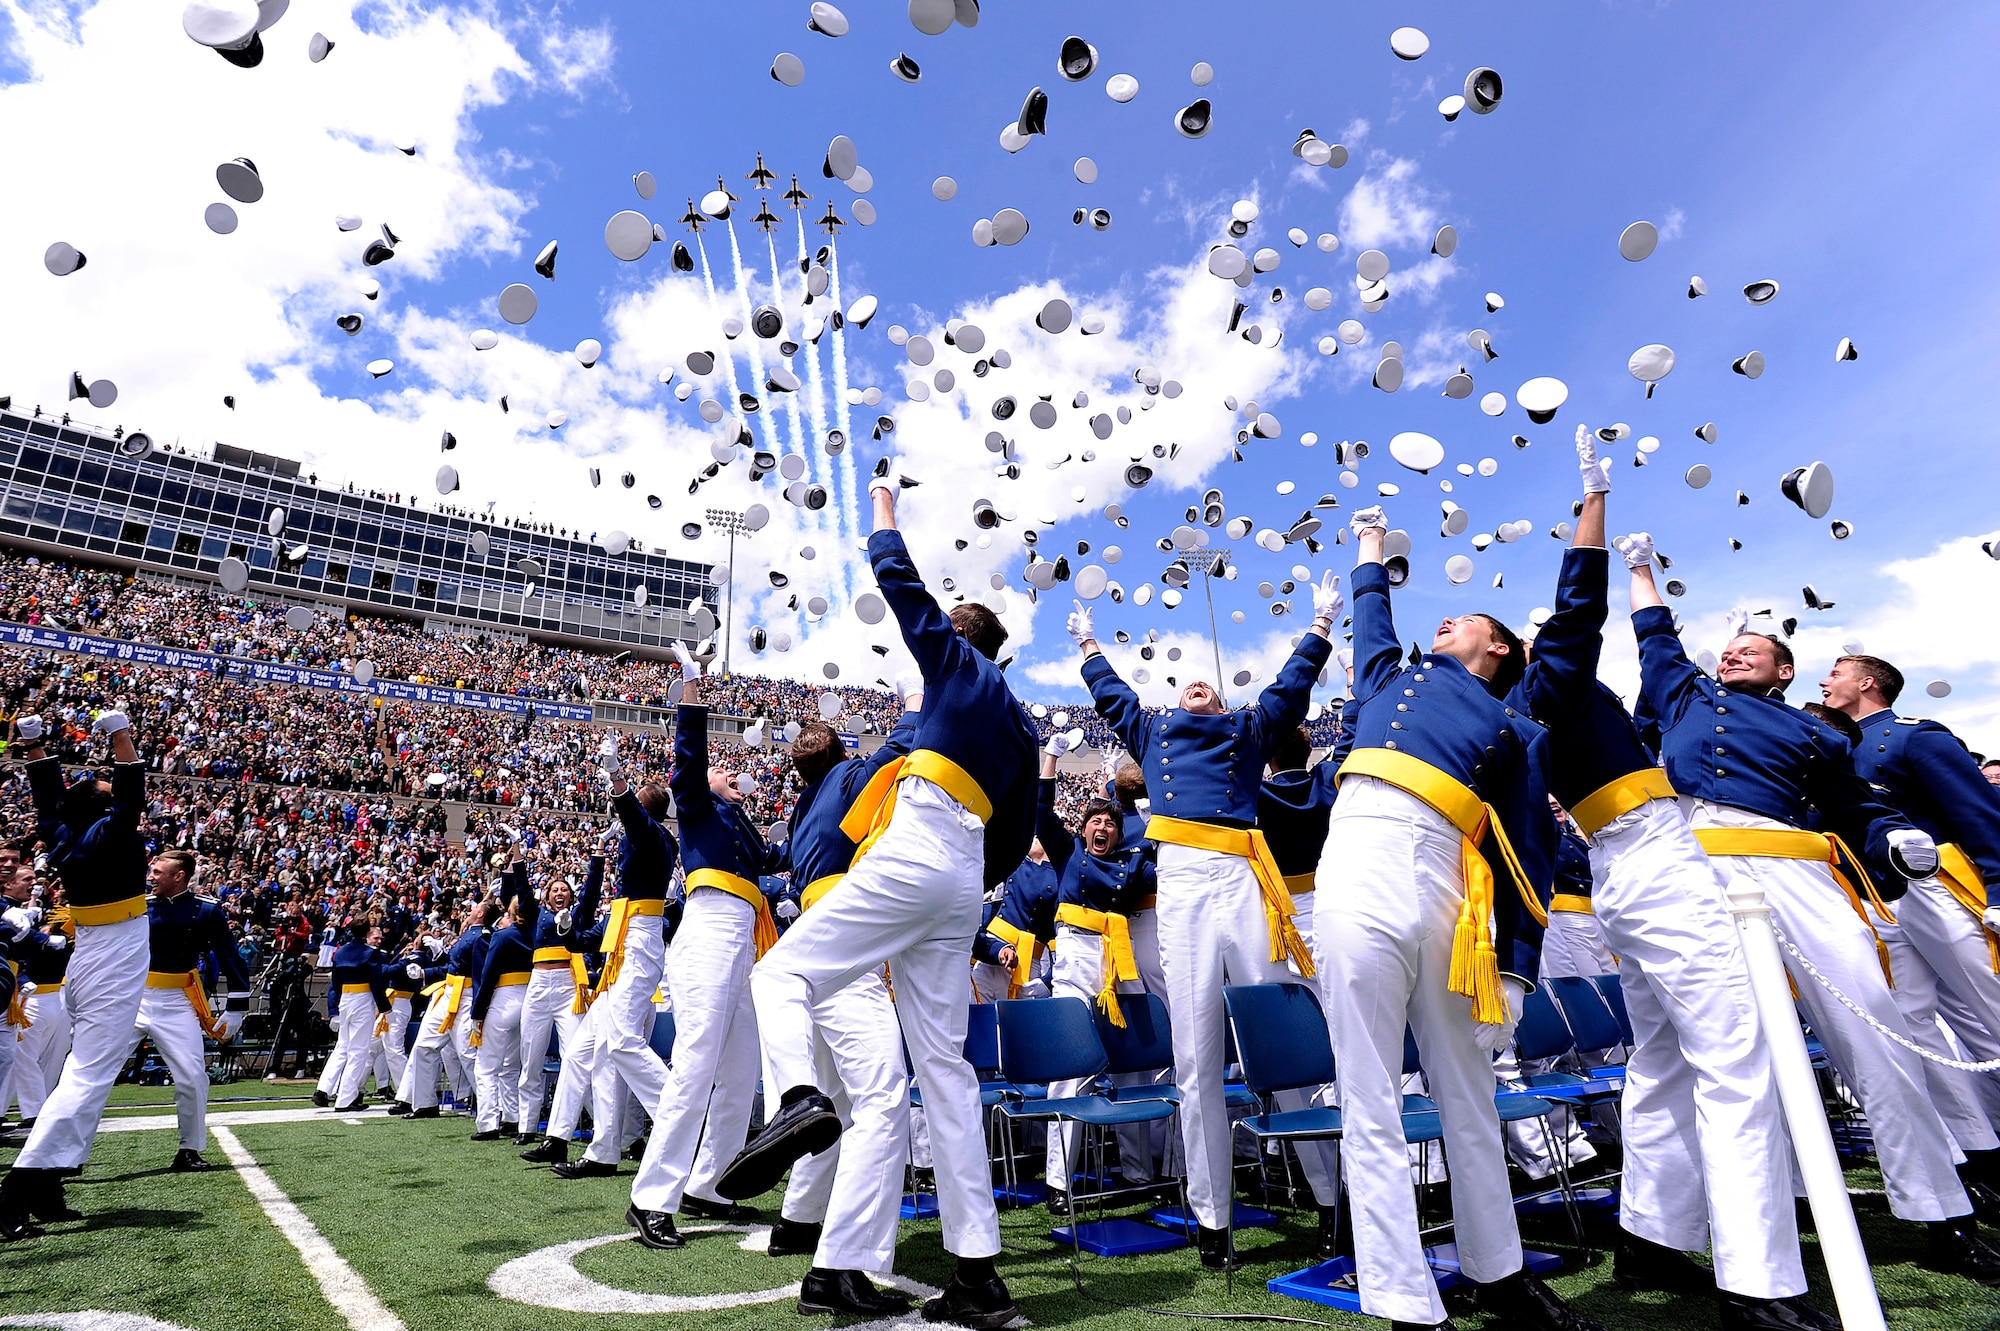 Newly commissioned second lieutenants celebrate at the end of the Air Force Academy's Class of 2011 graduation ceremony May 25, 2011. Flying overhead are F-16 Fighting Falcons with the Thunderbirds. Secretary of the Air Force Michael B. Donley was the guest speaker for the commencement. (U.S. Air Force photo/Mike Kaplan)